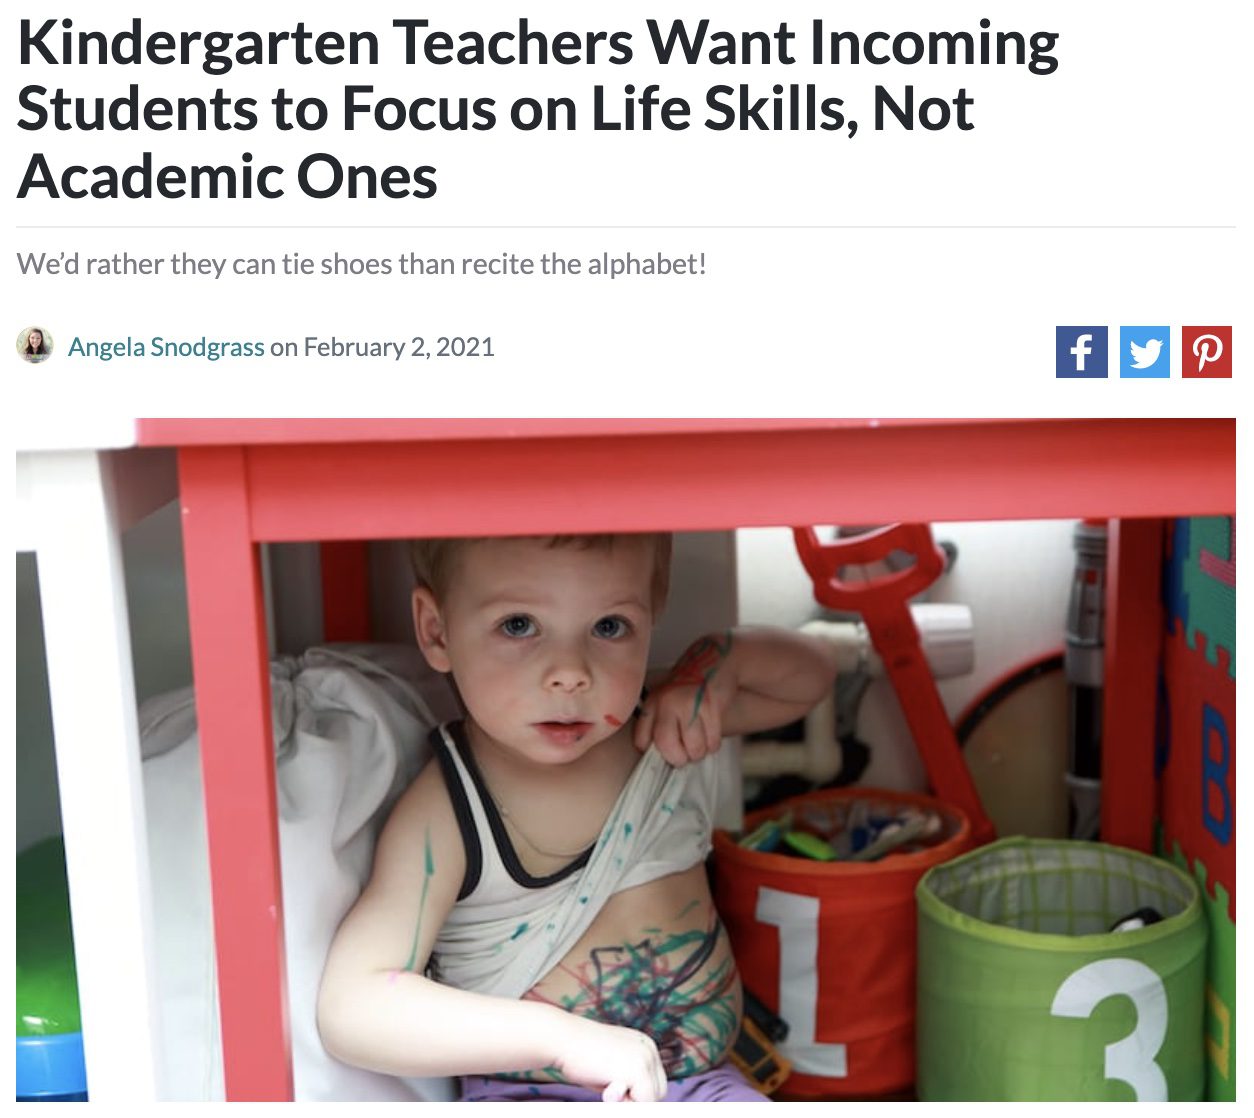 Screencap of an article about what kindergarten teachers want to focus on